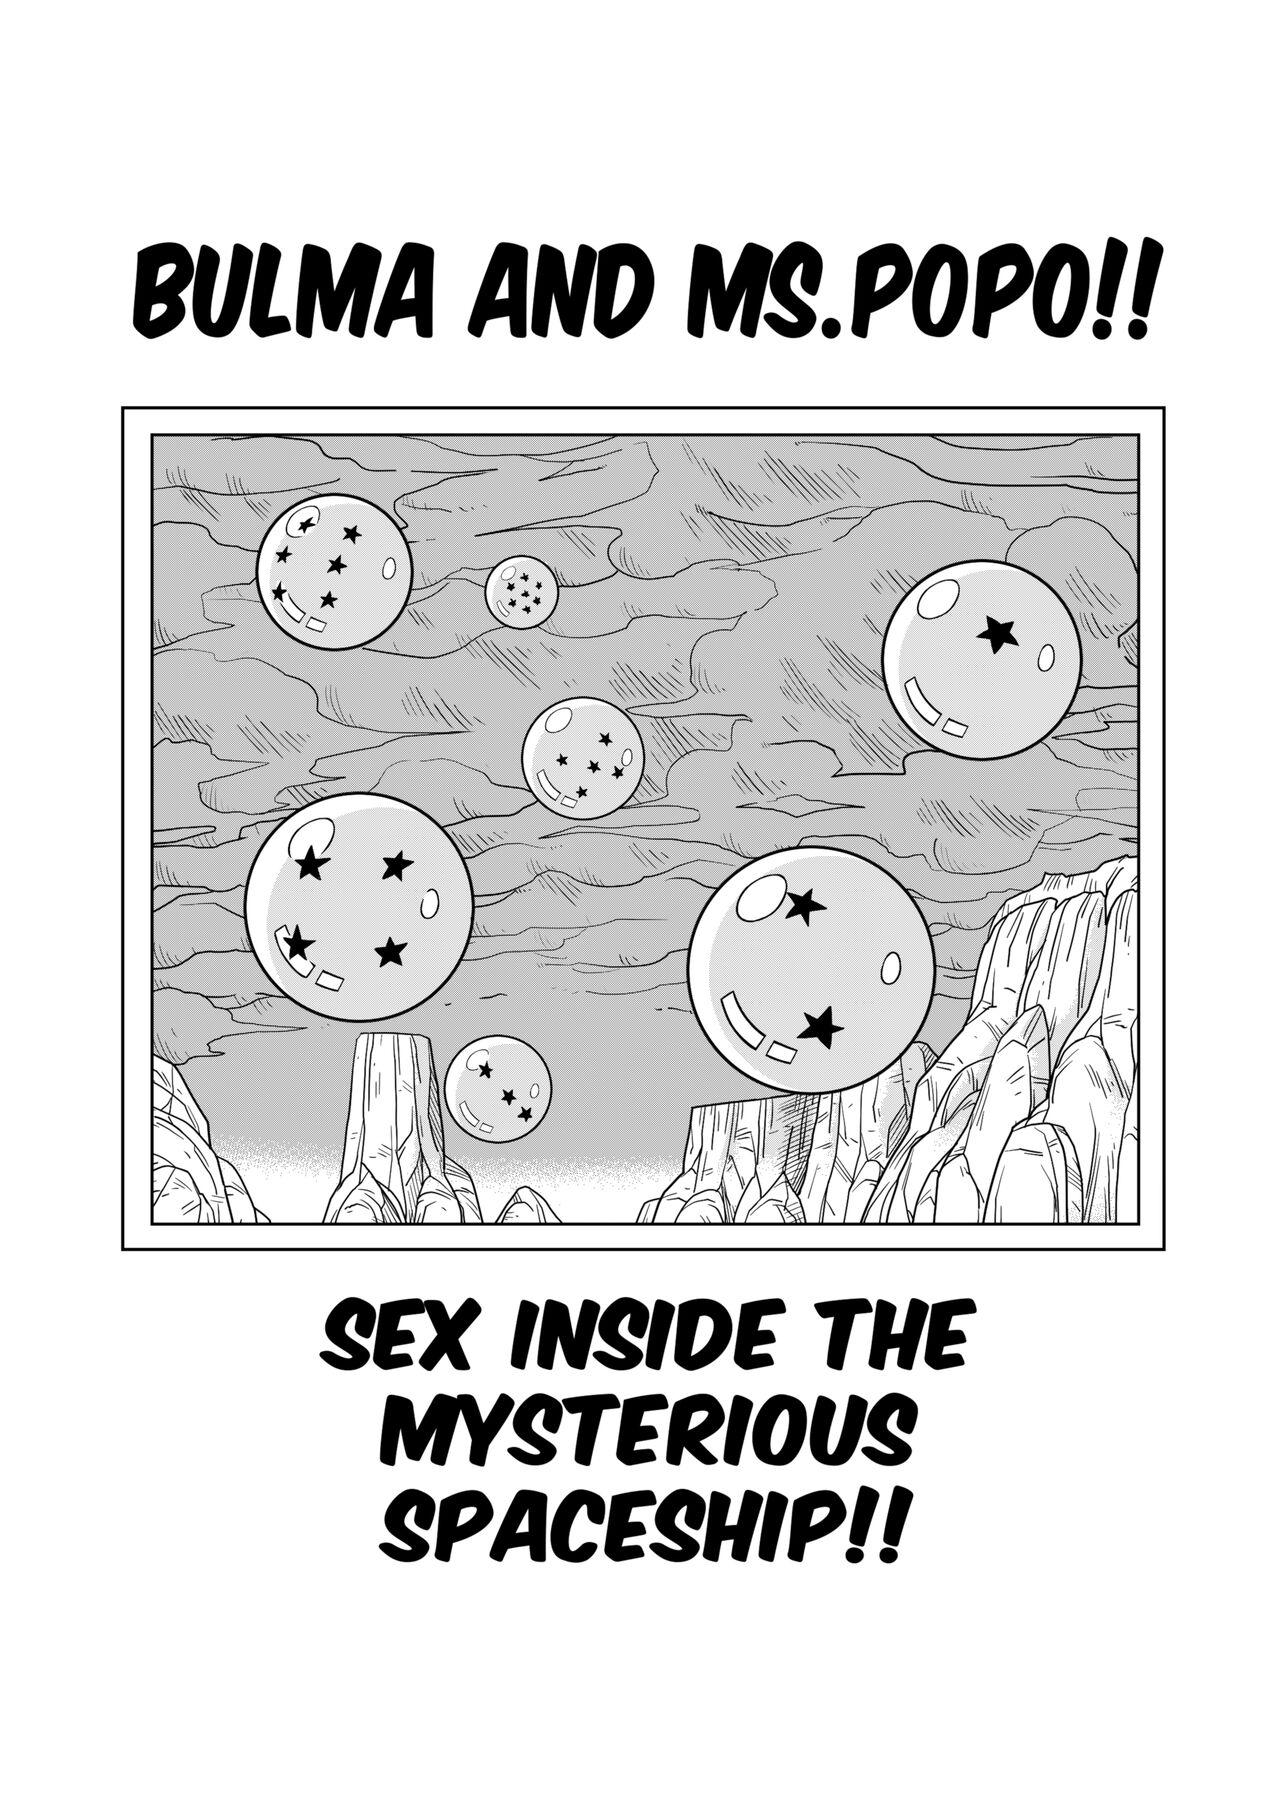 Infiel Bulma Meets Mr.Popo - Sex inside the Mysterious Spaceship! - Dragon ball z Gang - Page 4